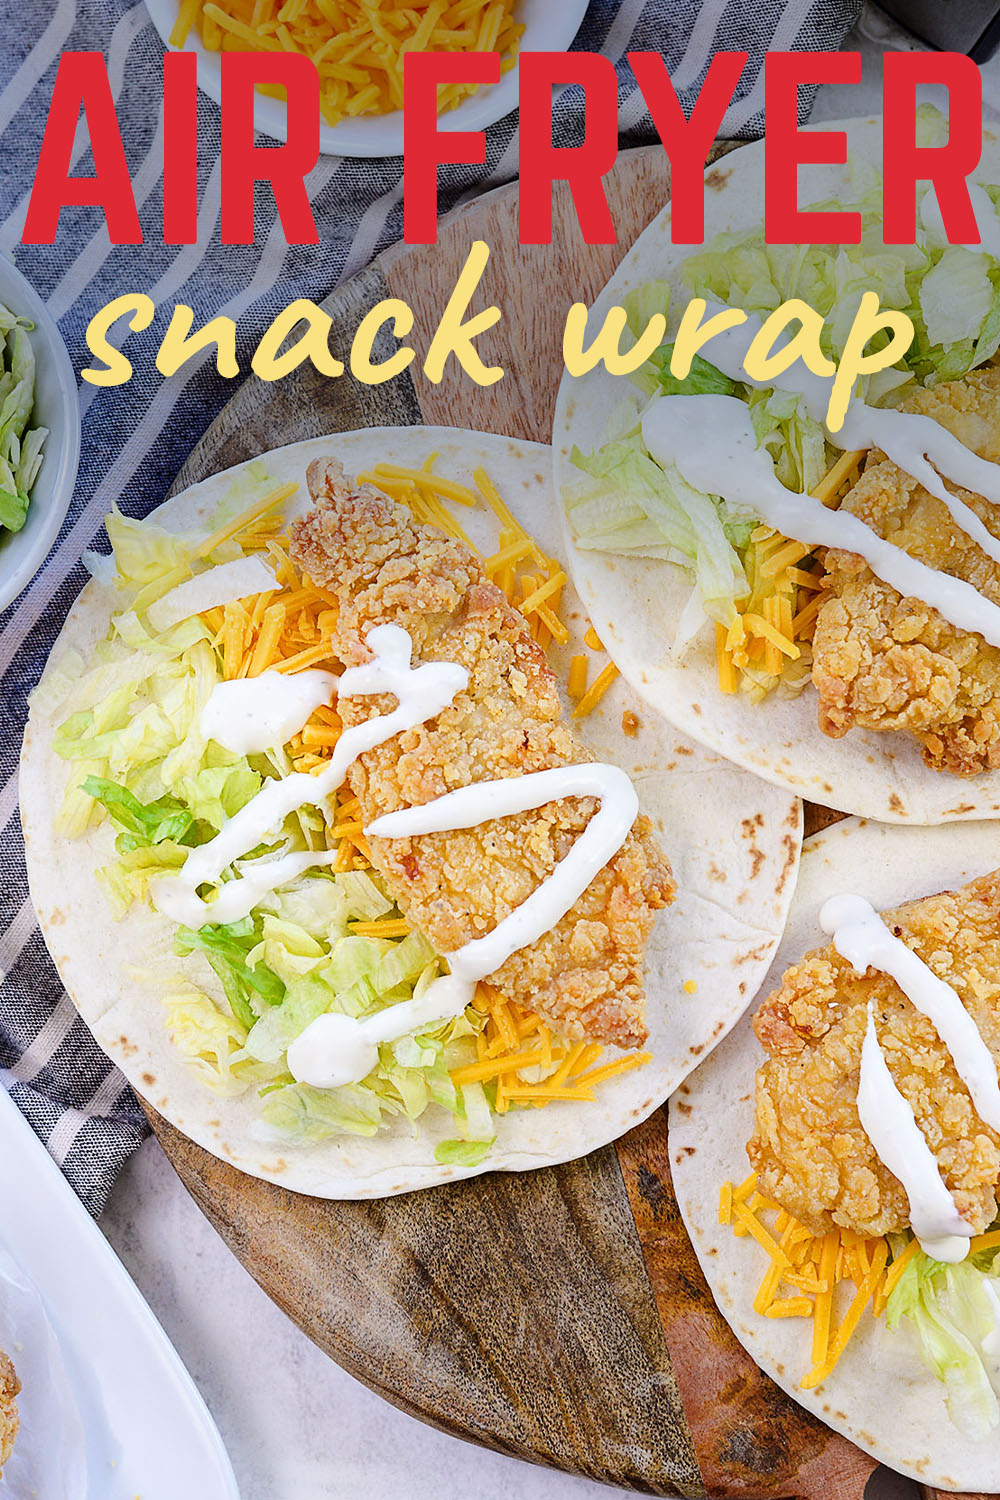 These are the easiest snack wraps you could ever make!